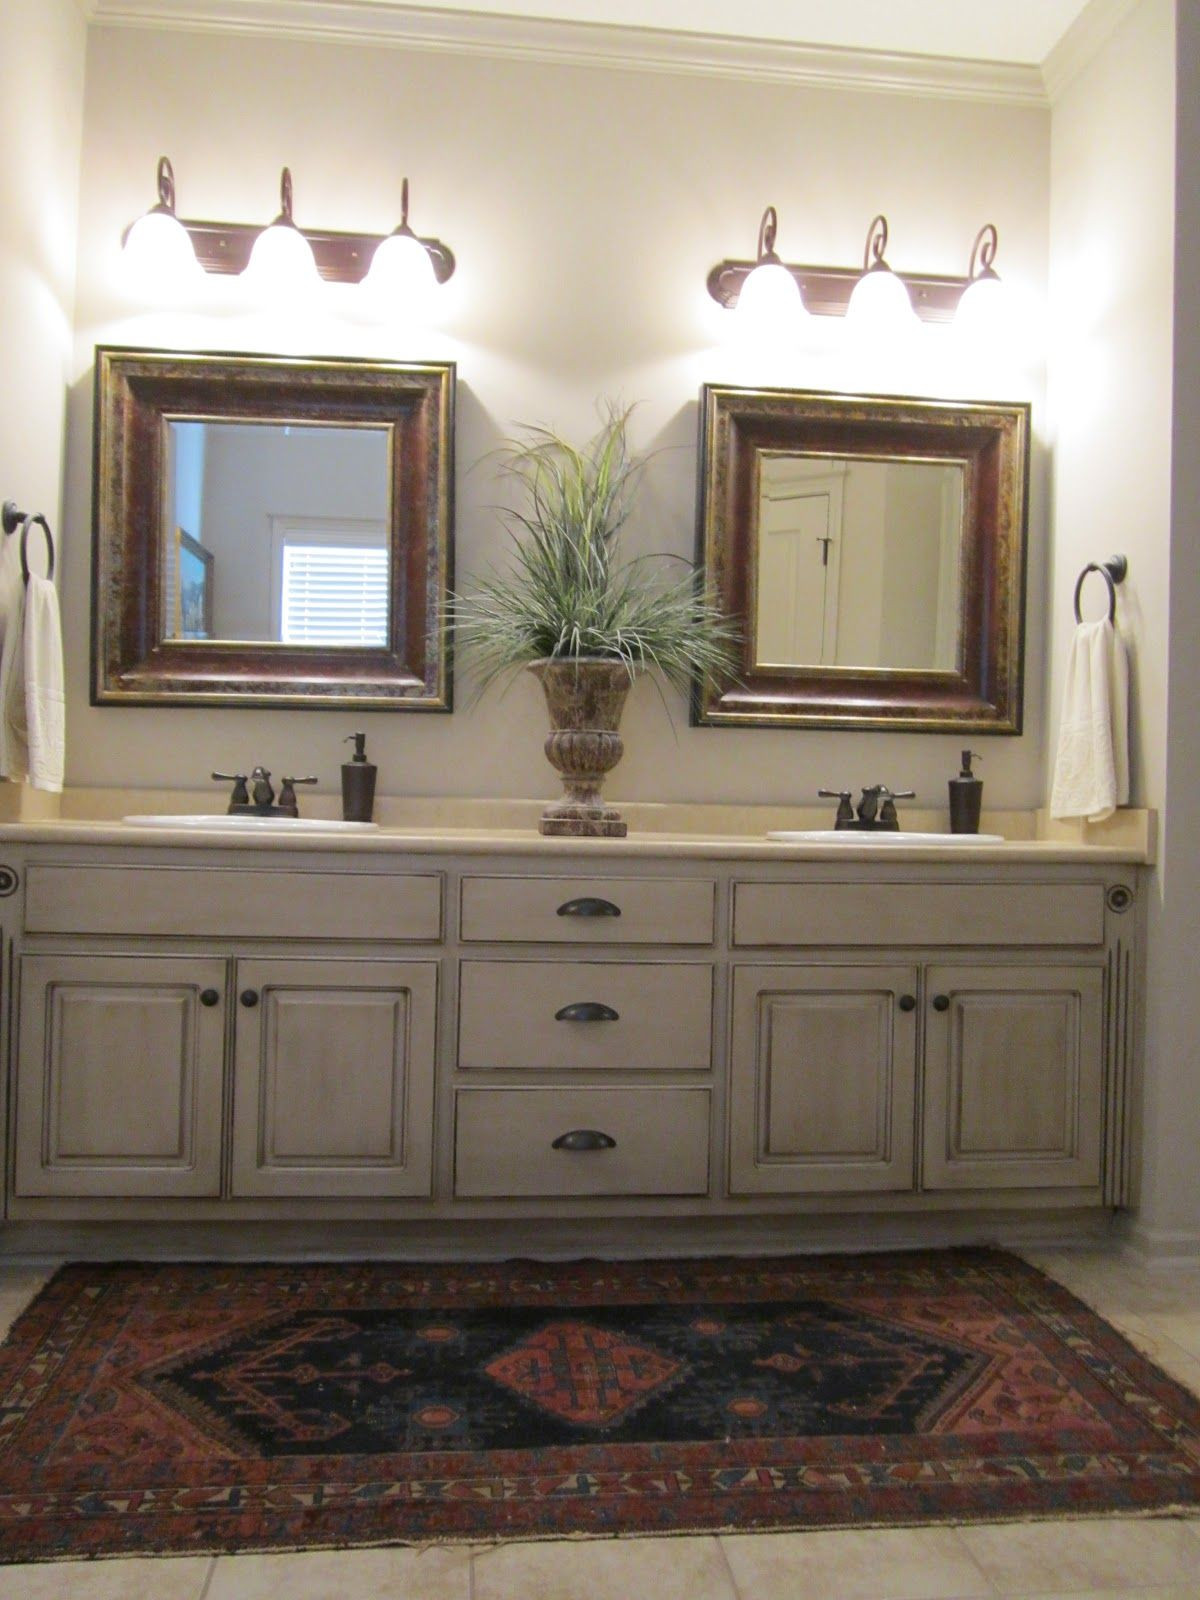 Painting Bathroom Cabinets Color Ideas
 Love these painted bathroom cabinets and the lights What